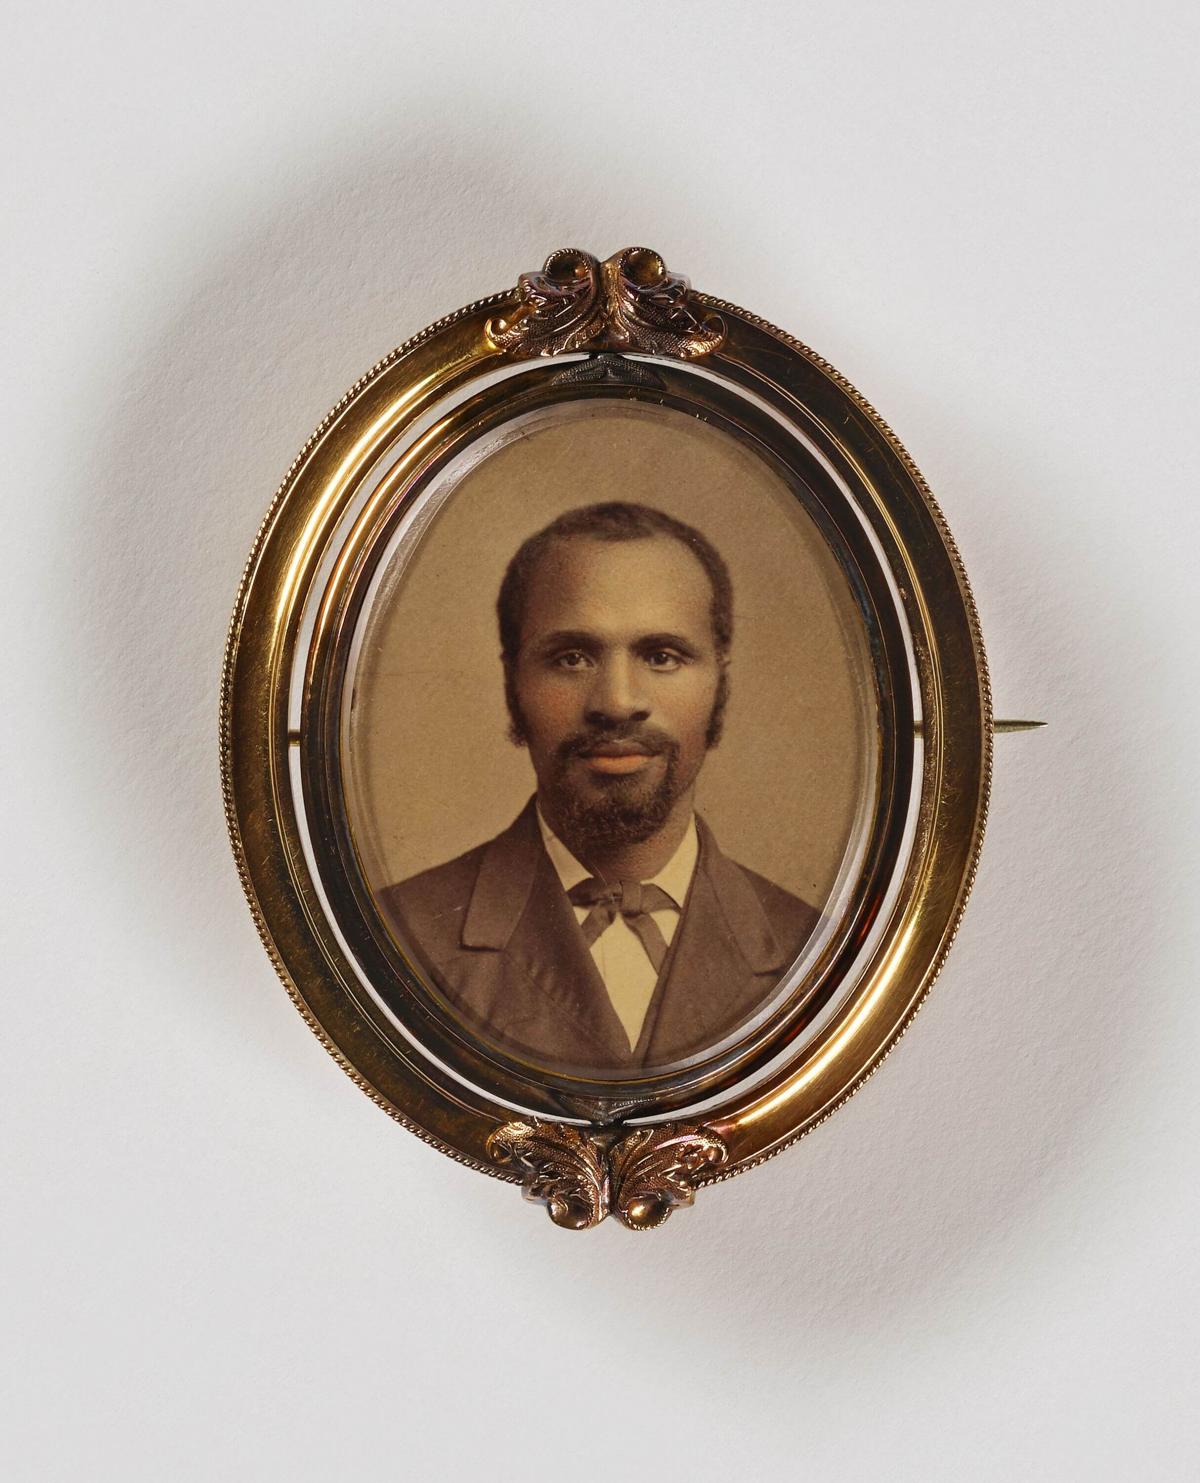 A gilded frame houses a photograph of a man with a goatee